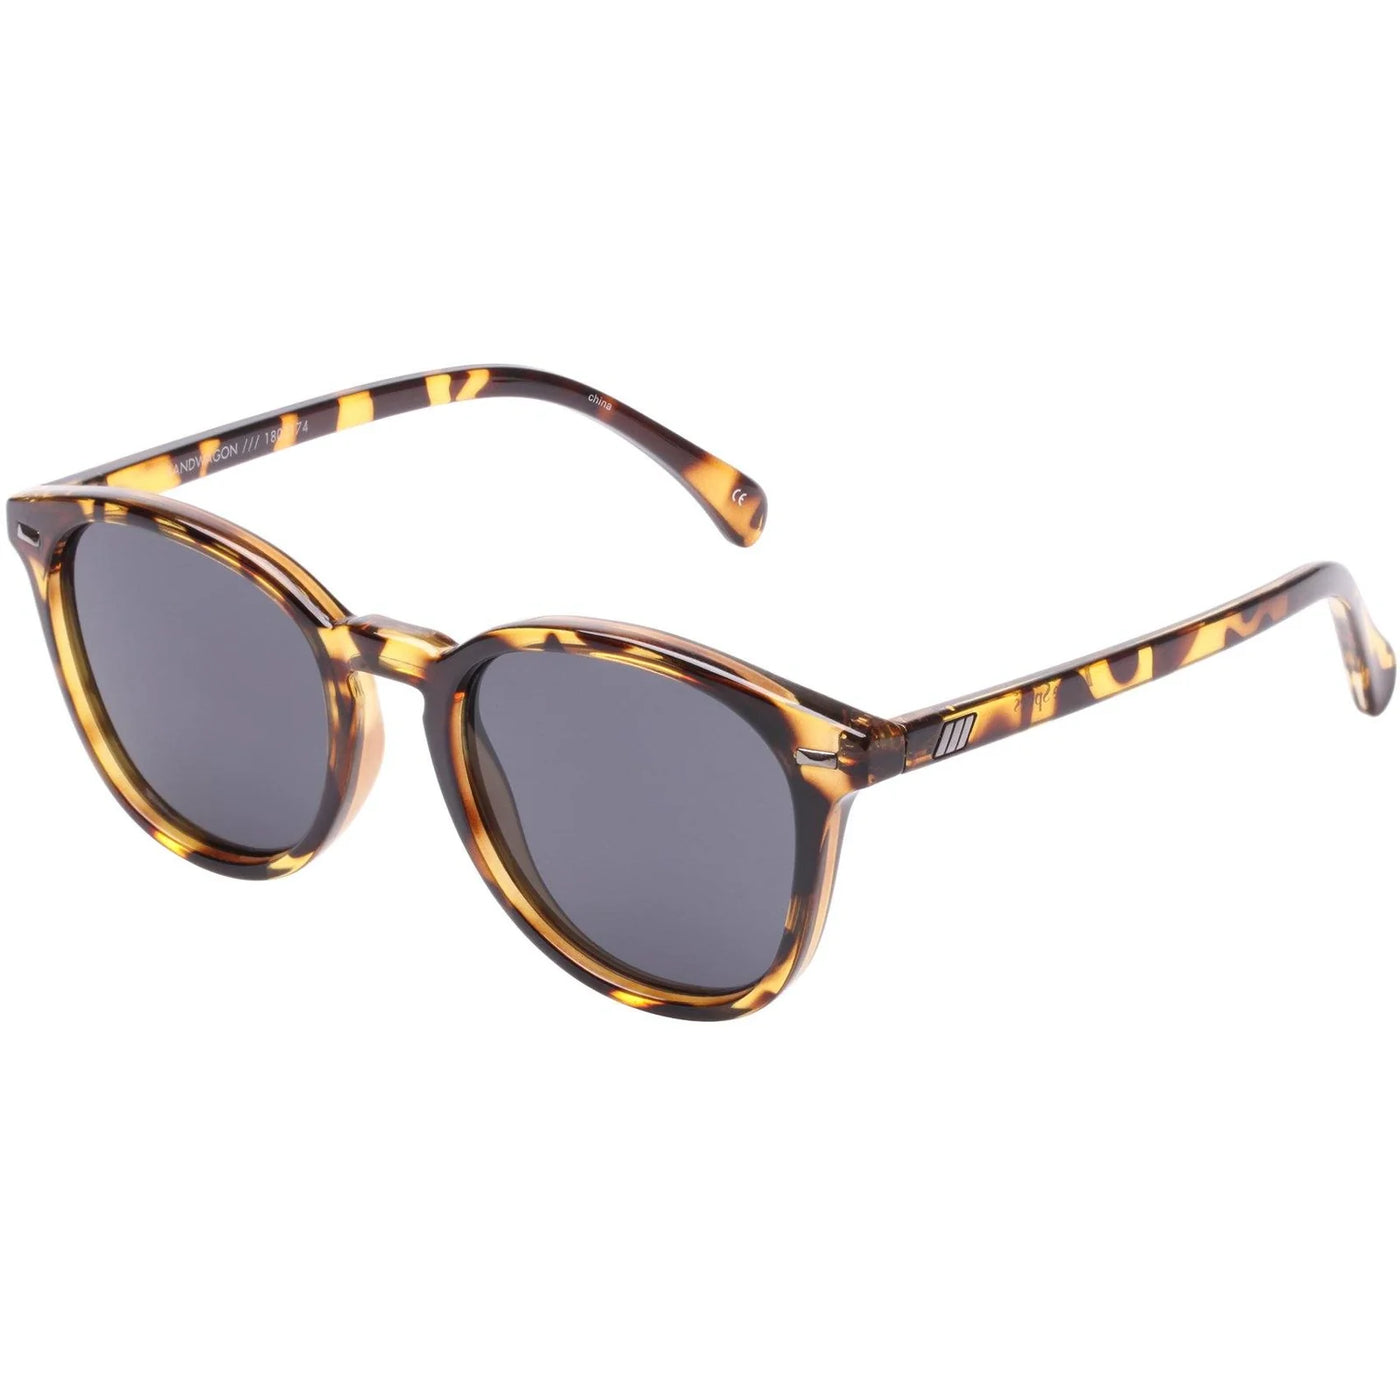 Bandwagon Sunglasses in Syrup Tort - Madison's Niche 